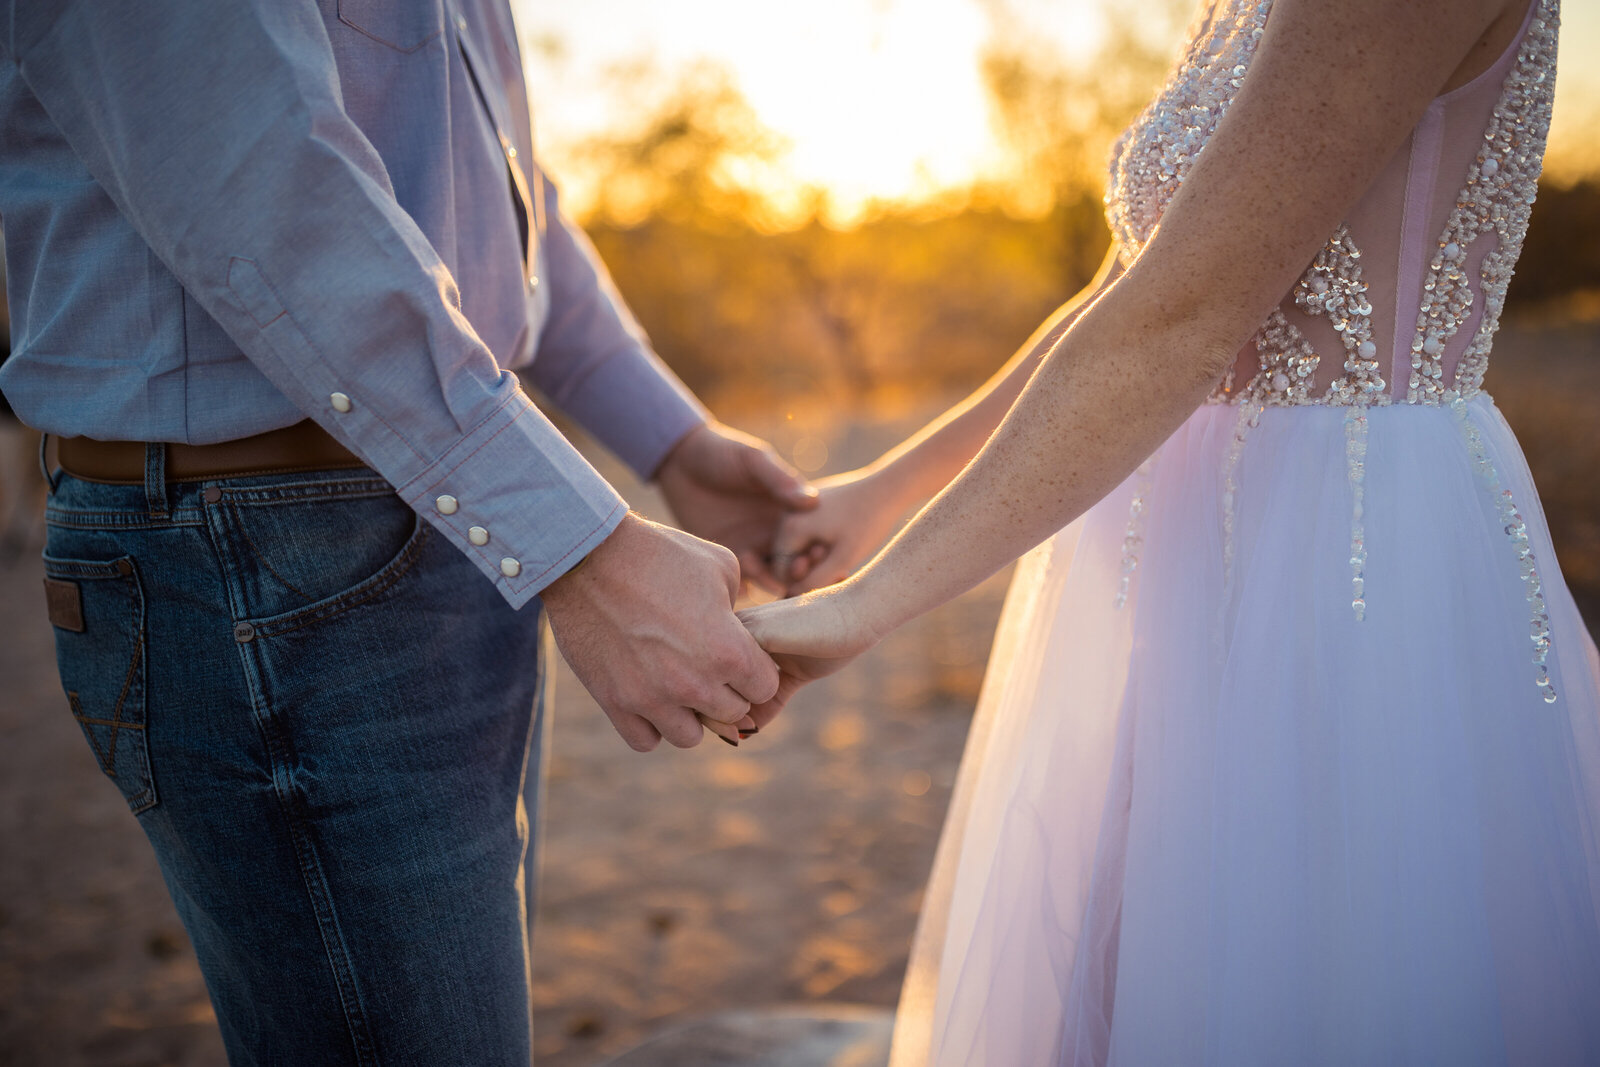 holding hands during elopement ceremony